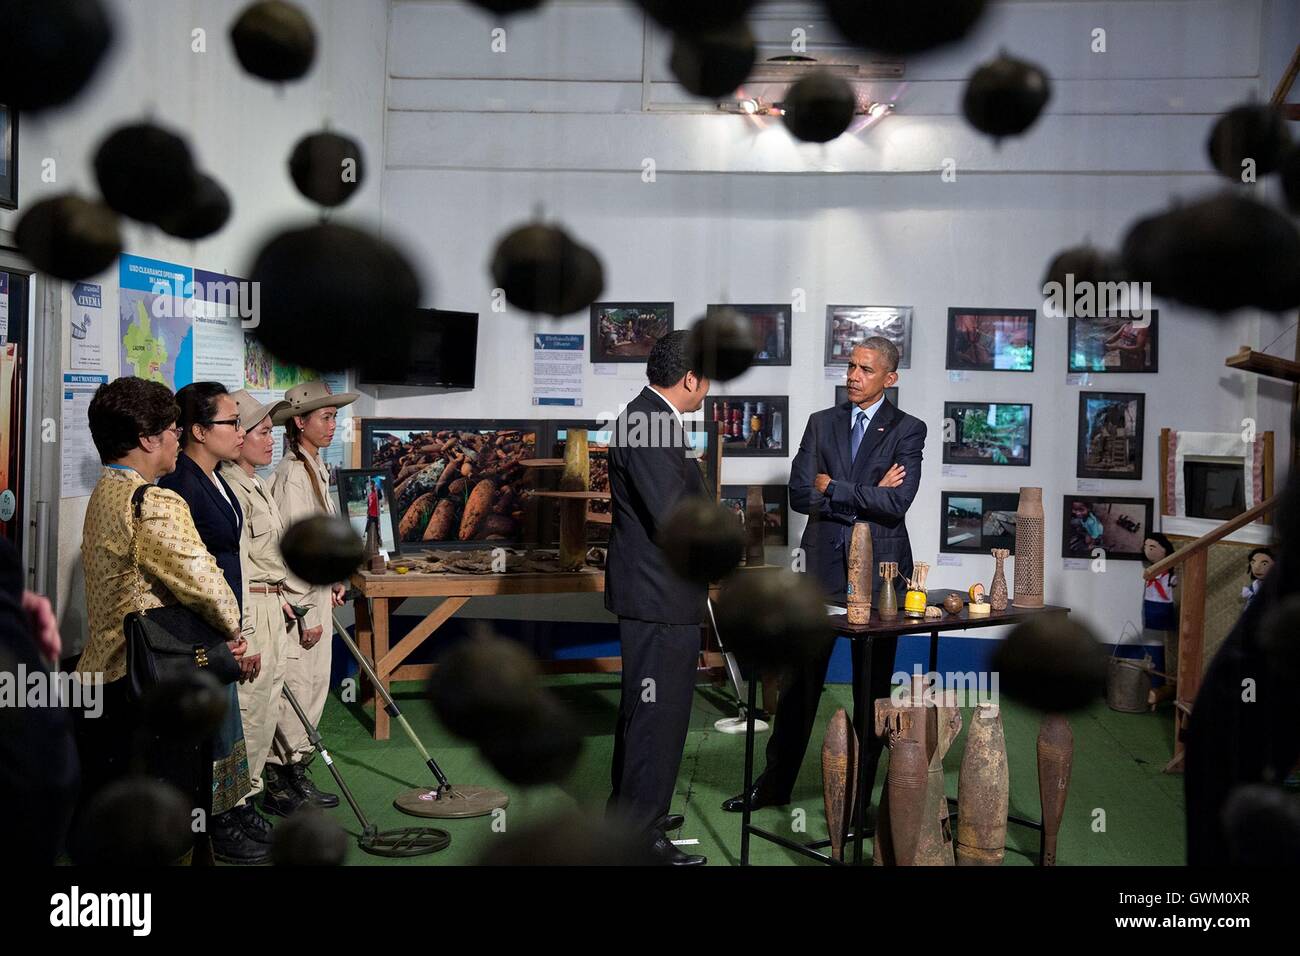 U.S President Barack Obama meets with Thoummy Silamphan and other unexploded ordnance blast survivors at the Cooperative Orthotic Prosthetic Enterprise September 7, 2016 in Vientiane, Laos. Obama is in Laos for the ASEAN Summit. Stock Photo